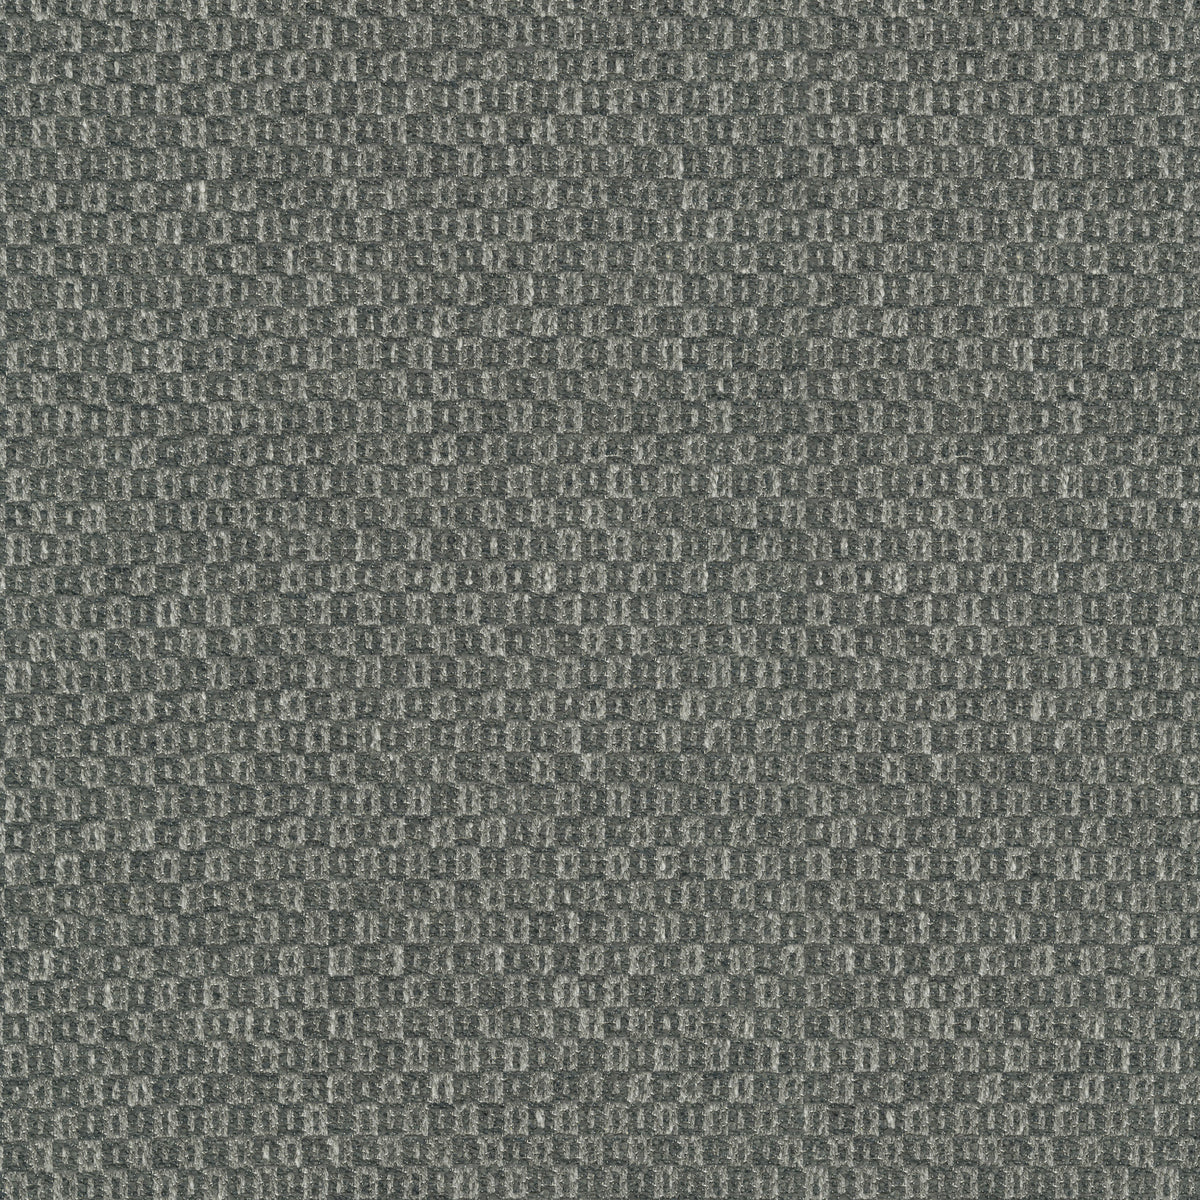 P/K Lifestyles Parque - Charcoal 412359 Fabric Swatch